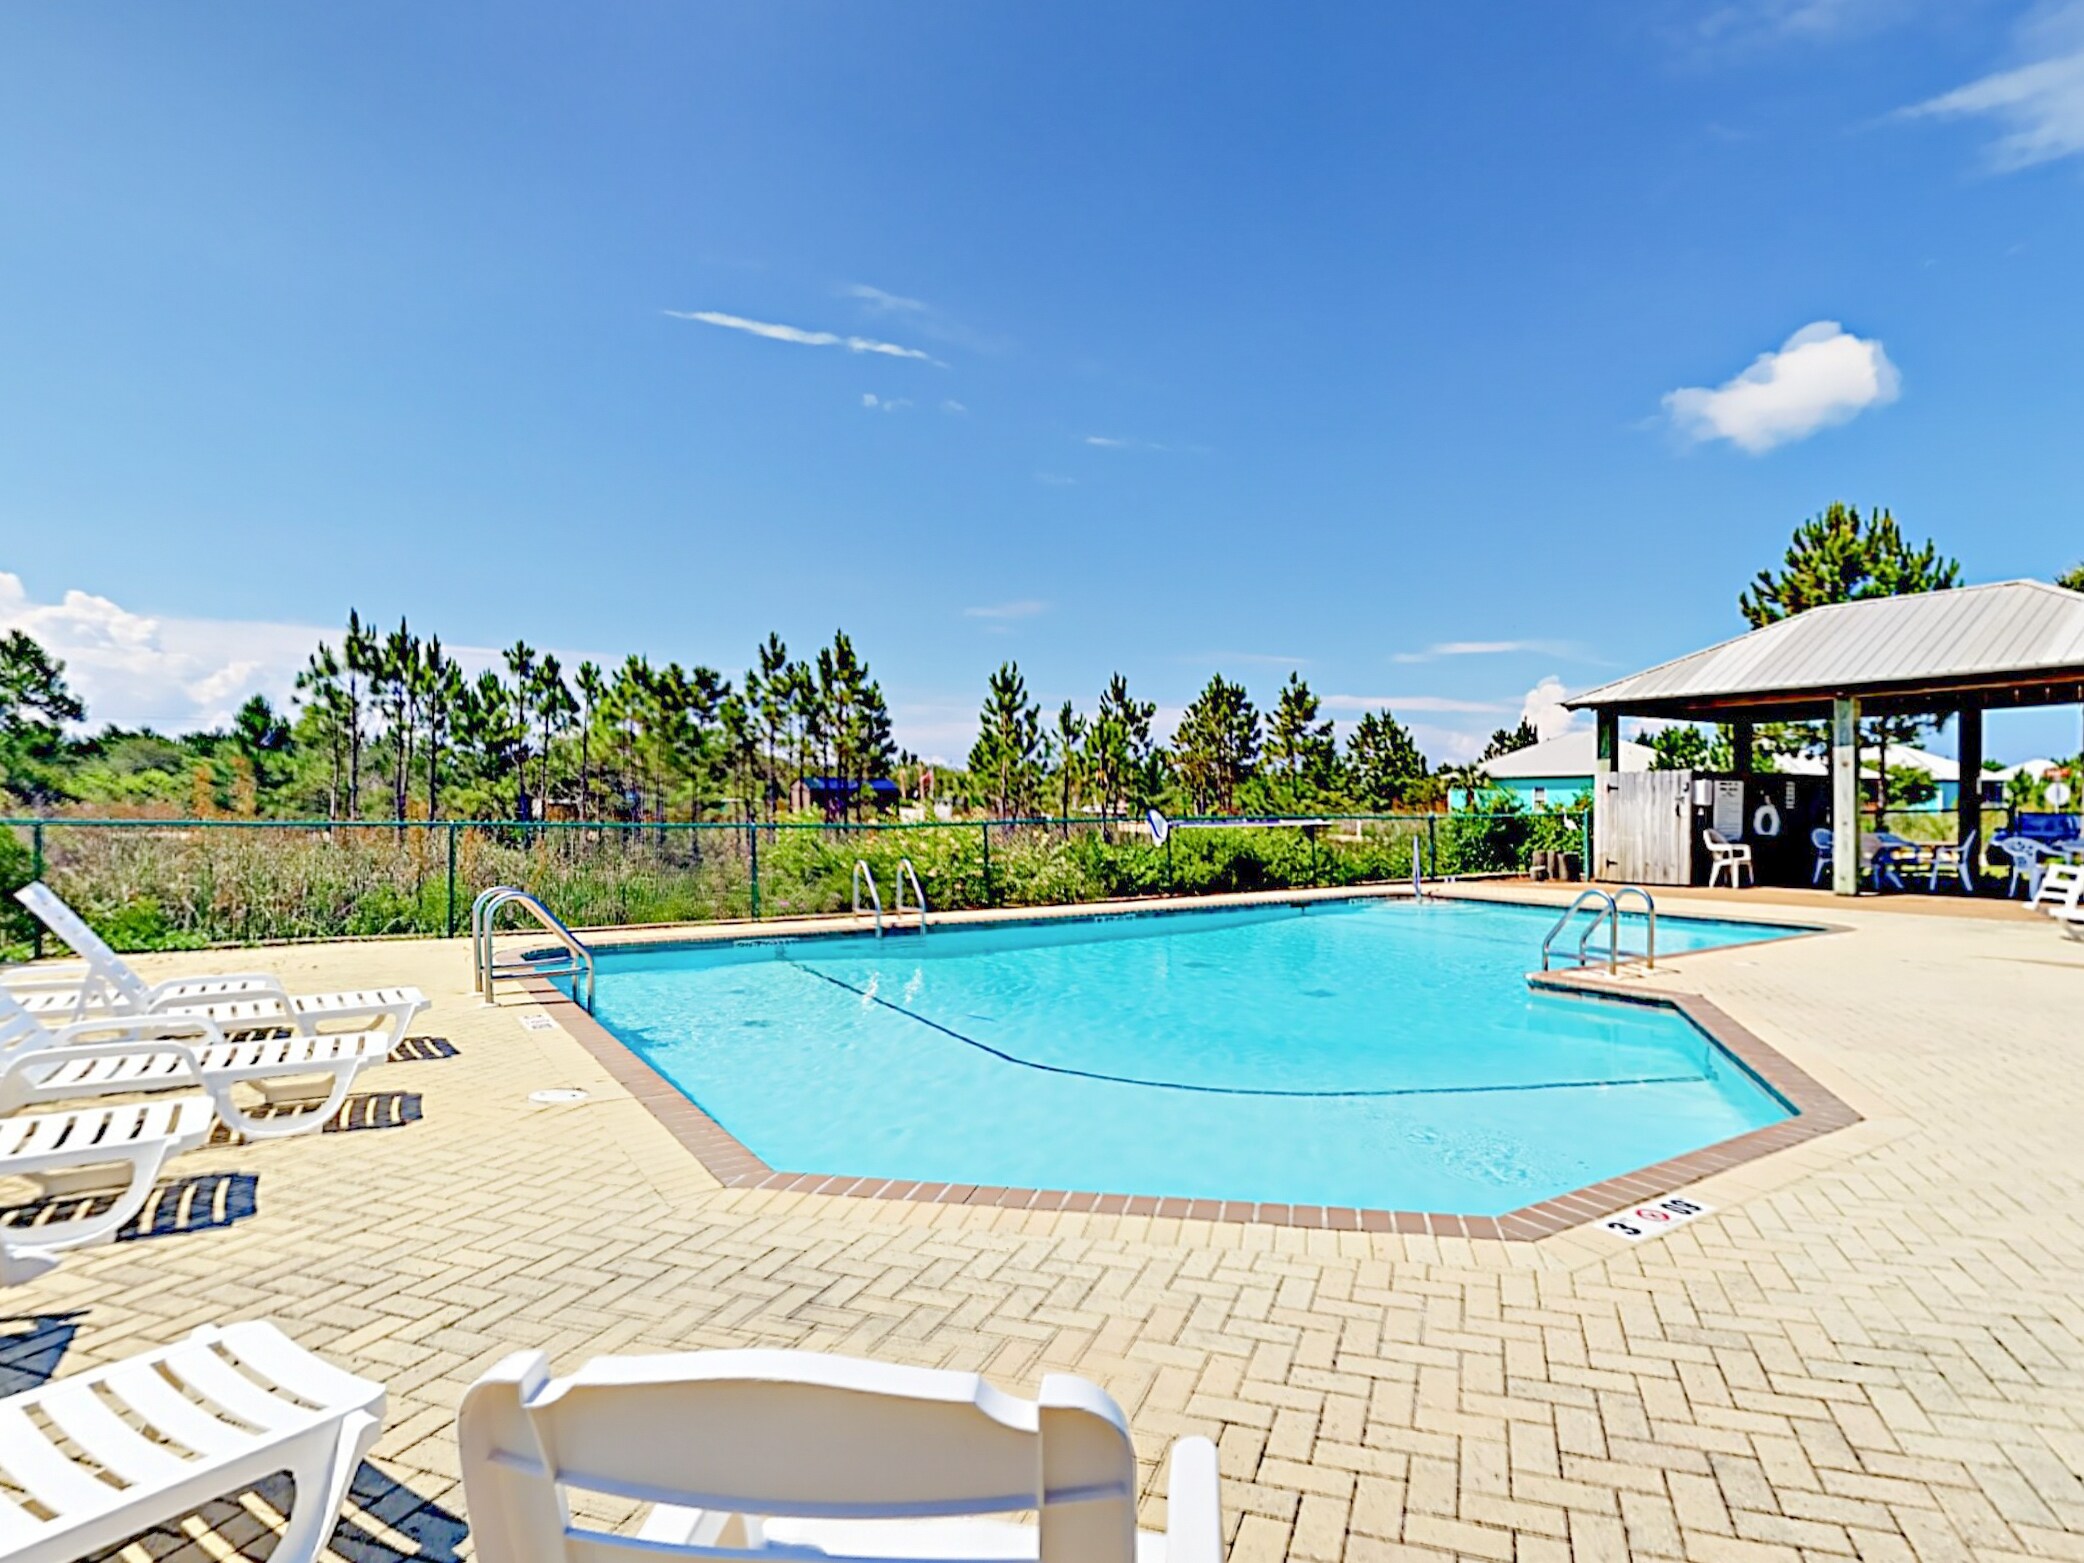 Soak up the sun at the shared sparkling pool.